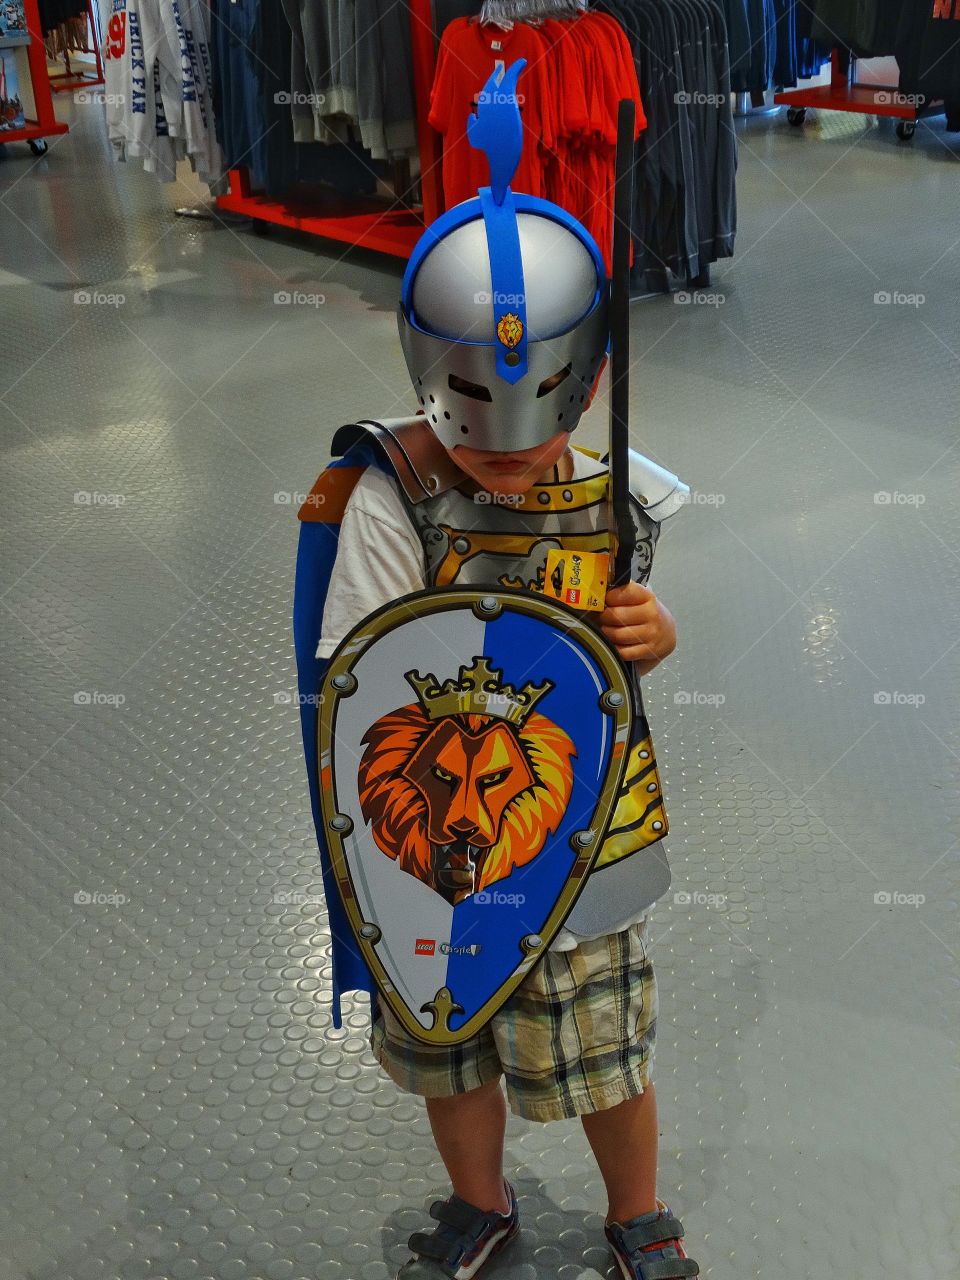 Boy In Knight Costume. Young Boy Dressed Up As A Medieval Knight
